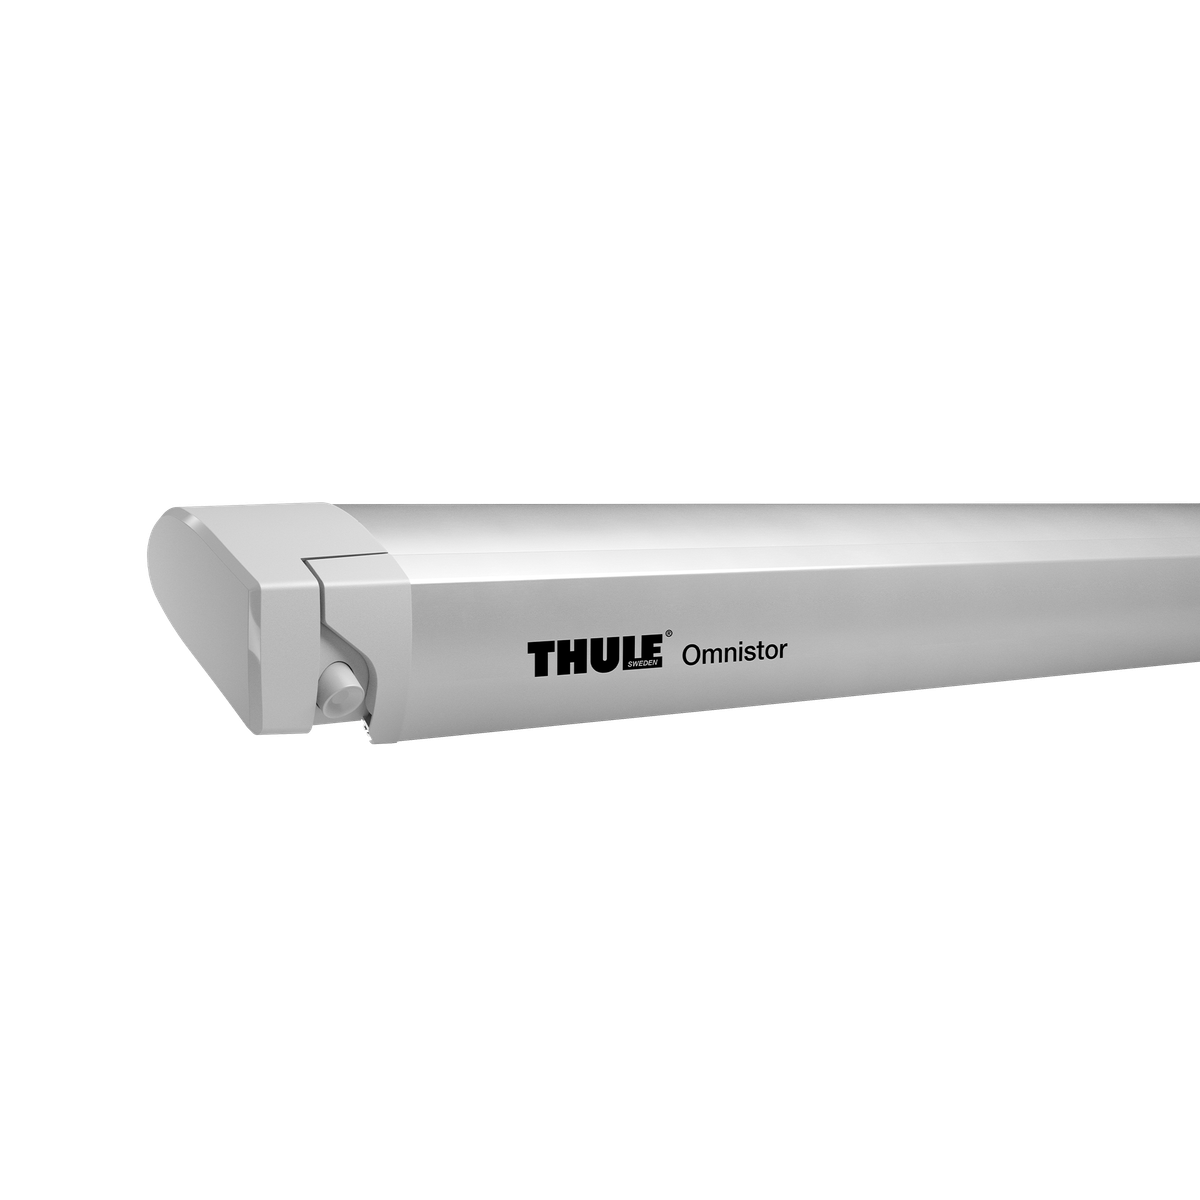 Thule Omnistor 6300 motorized roof awning 5.03x2.50 anodised gray